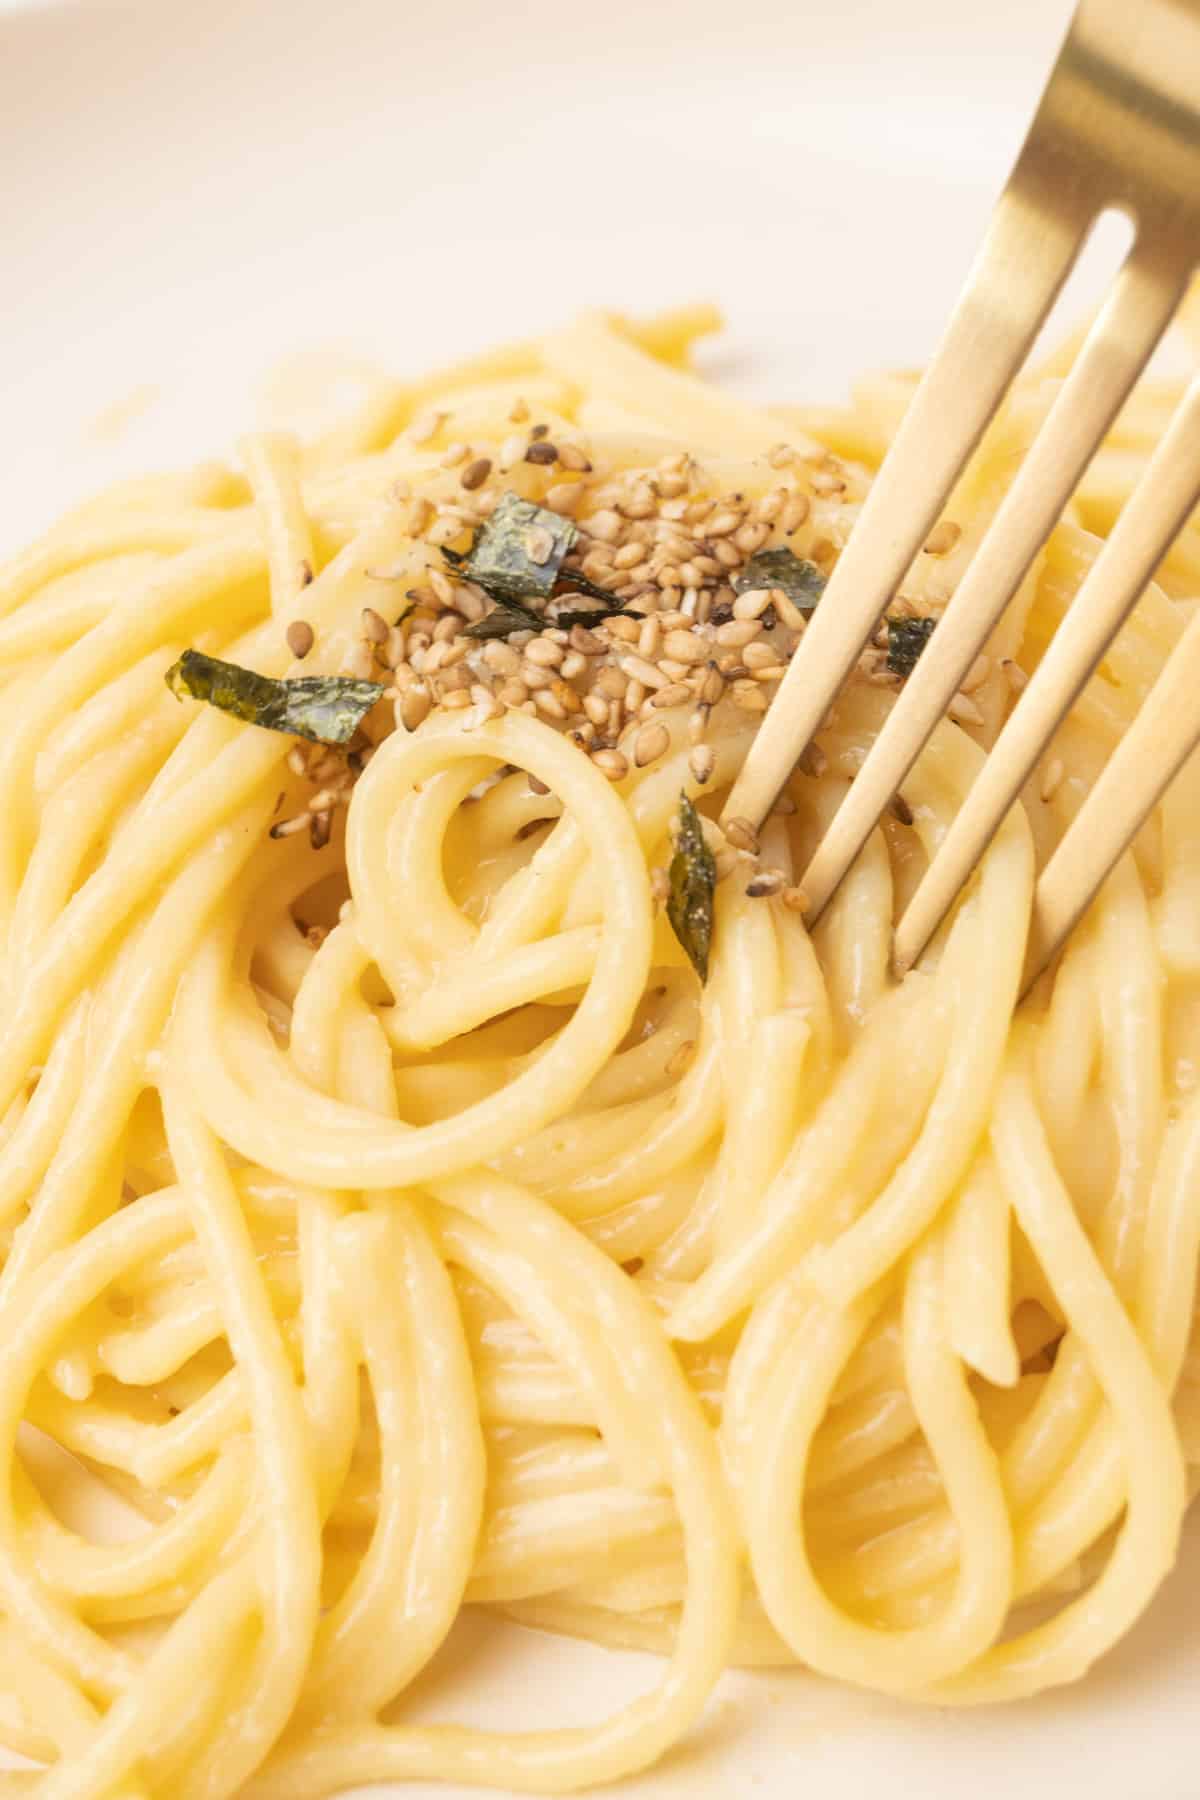 A fork digging into spaghetti coated in a creamy and glossy sauce and topped with sesame seeds and seaweed flakes.